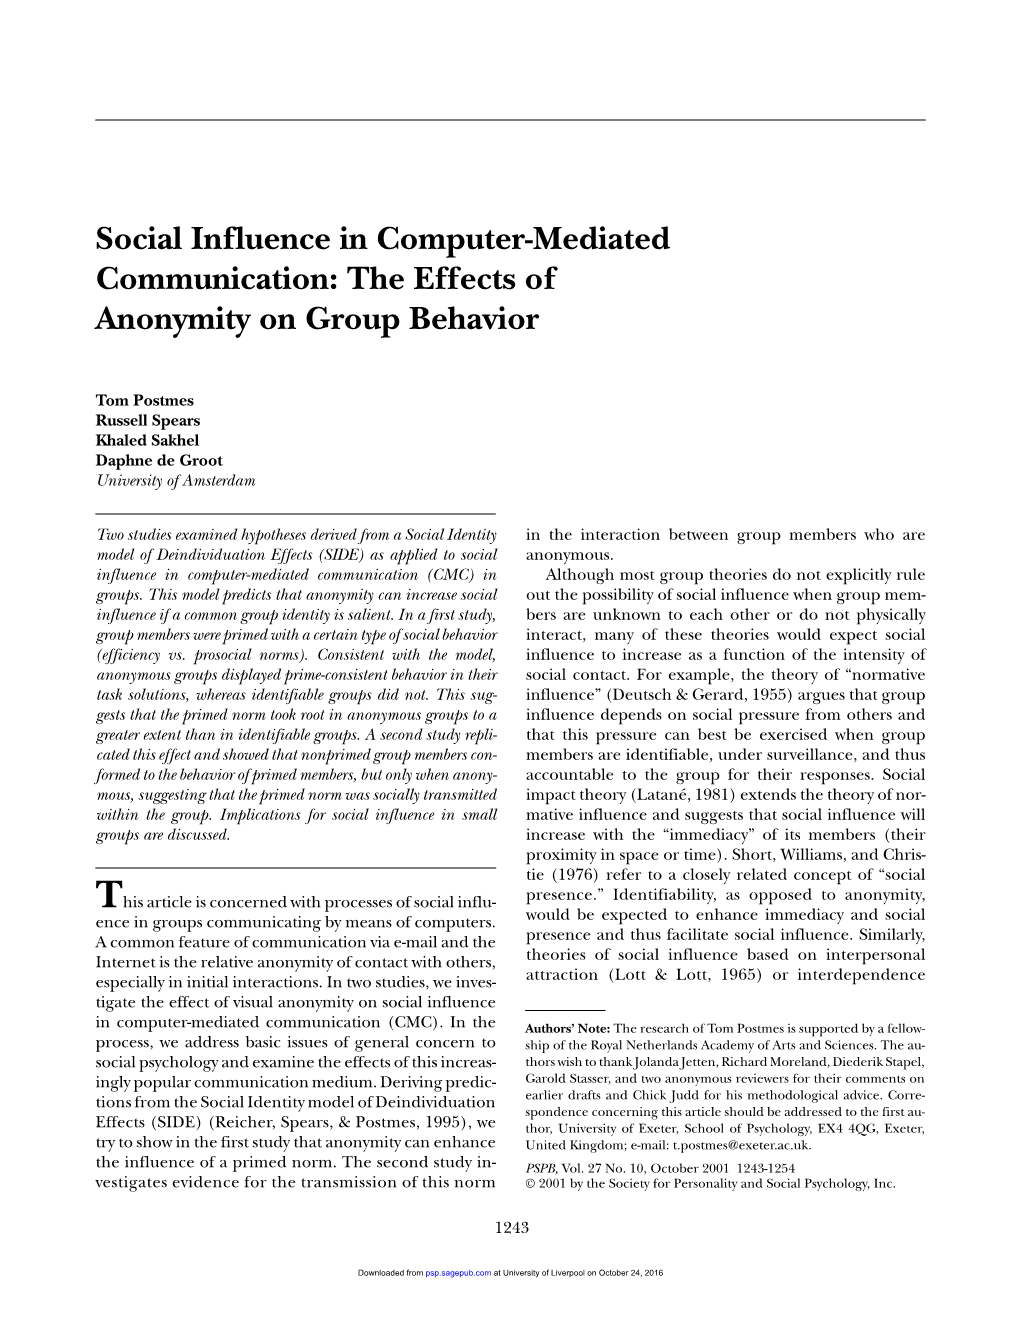 Social Influence in Computer-Mediated Communication: the Effects of Anonymity on Group Behavior